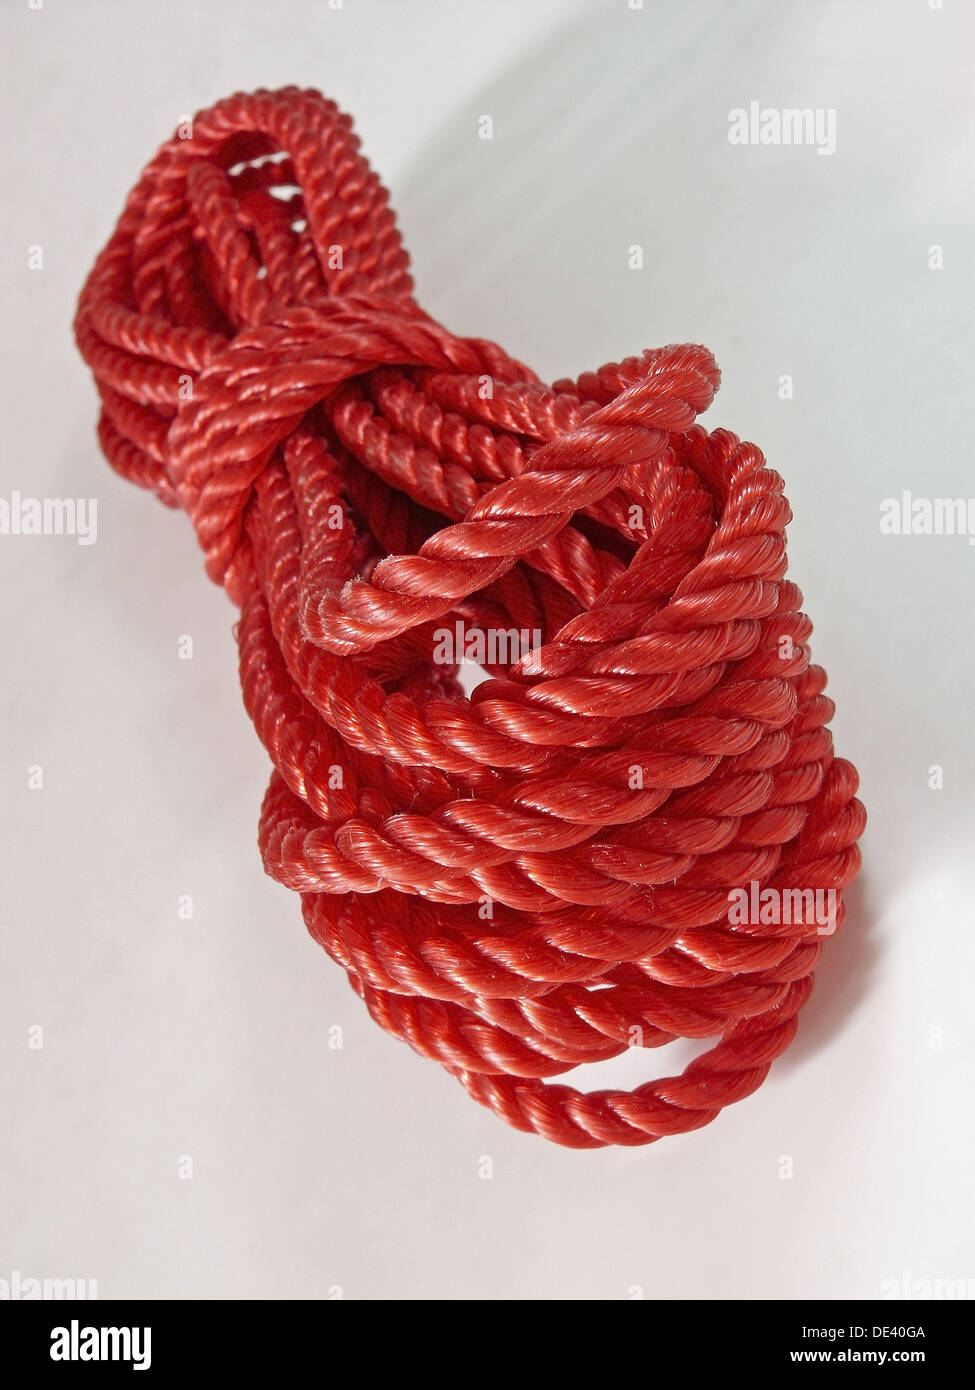 Close up of braided red nylon heavy duty commericial quality rope